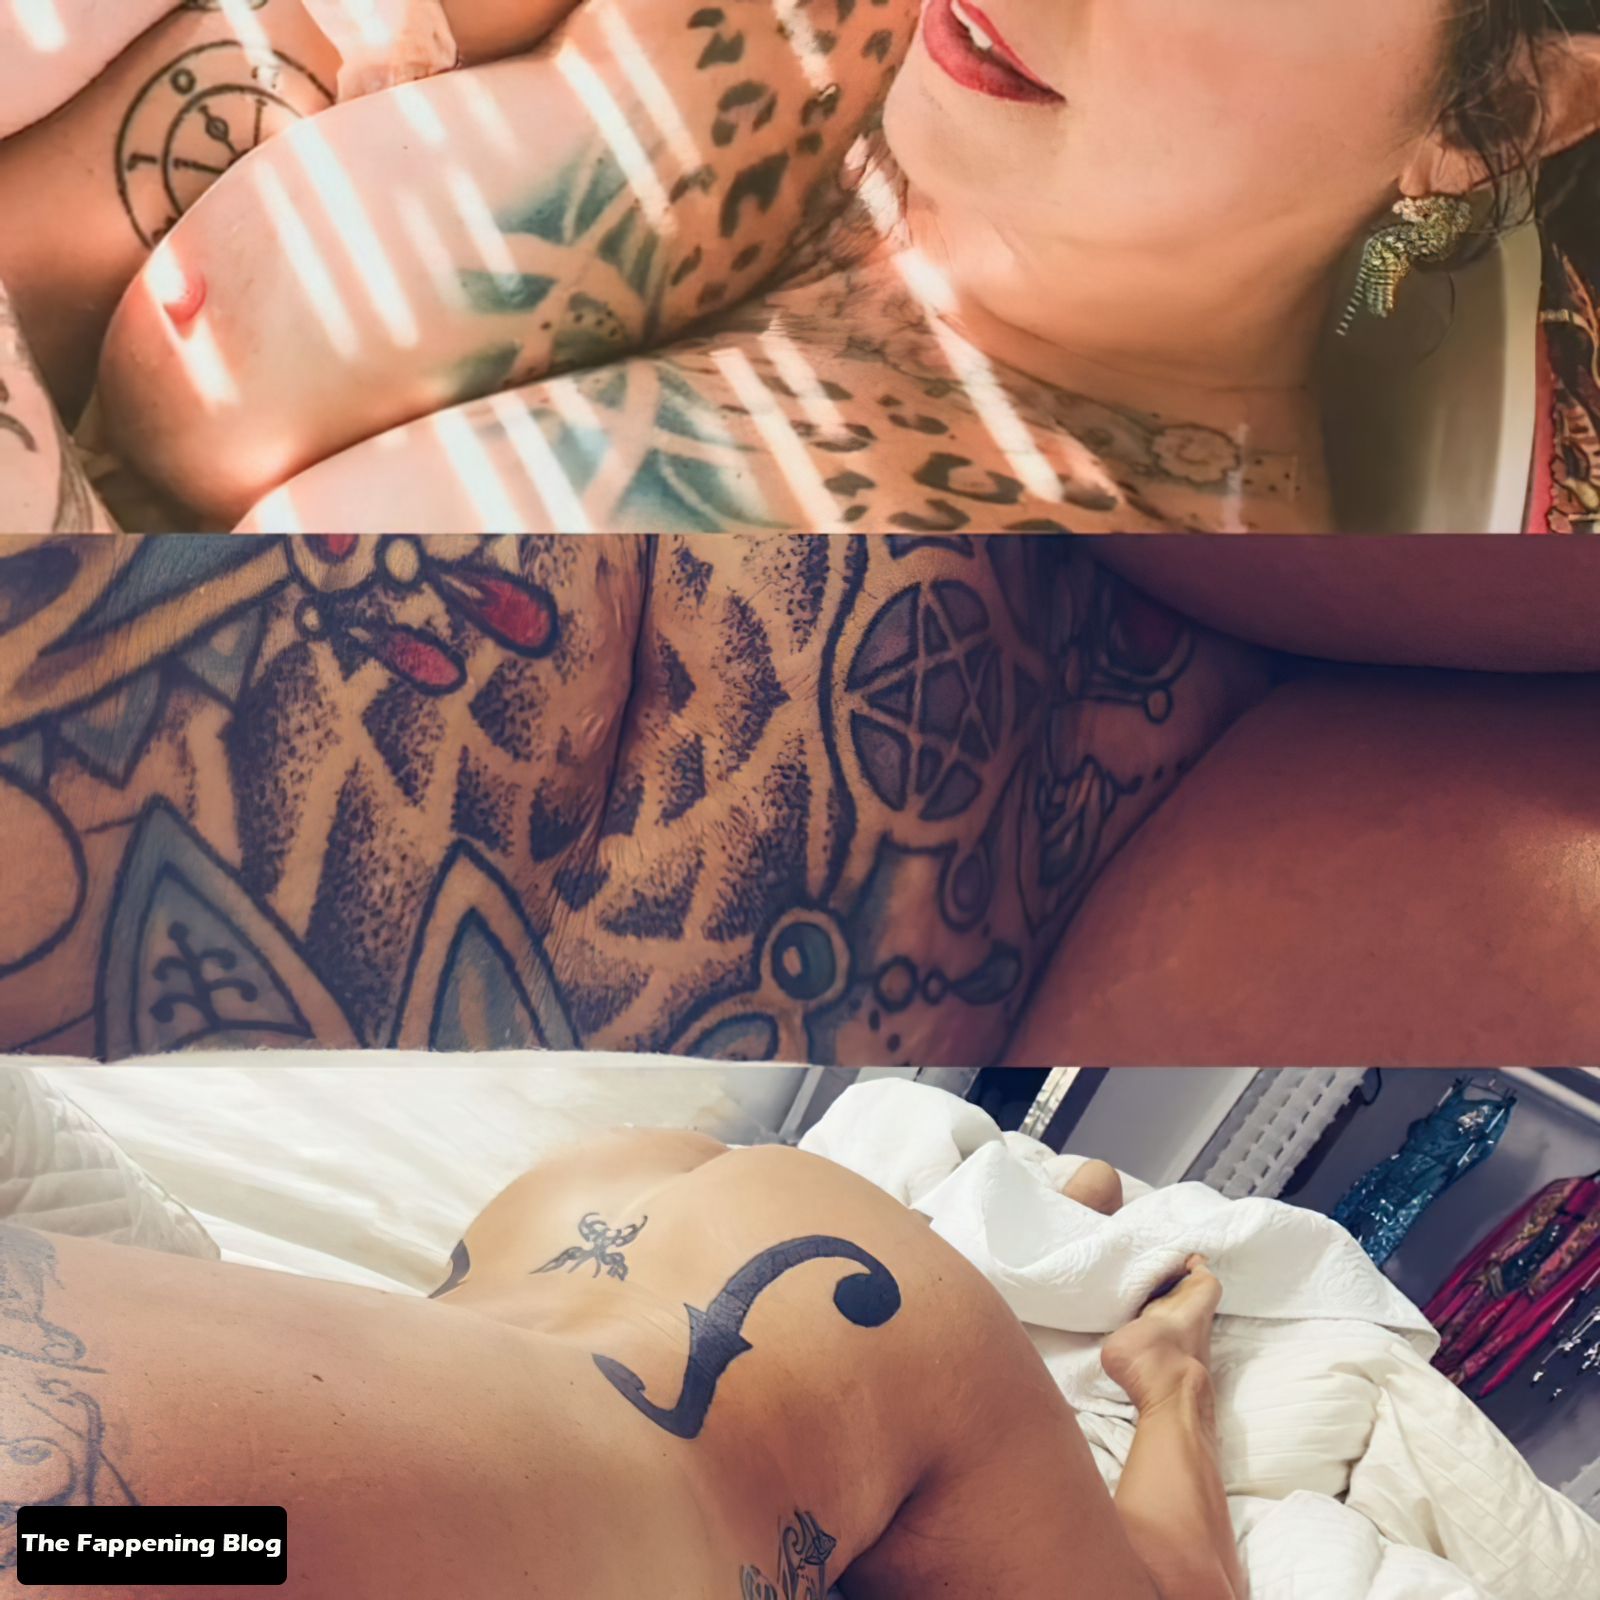 Nude pictures of danielle colby